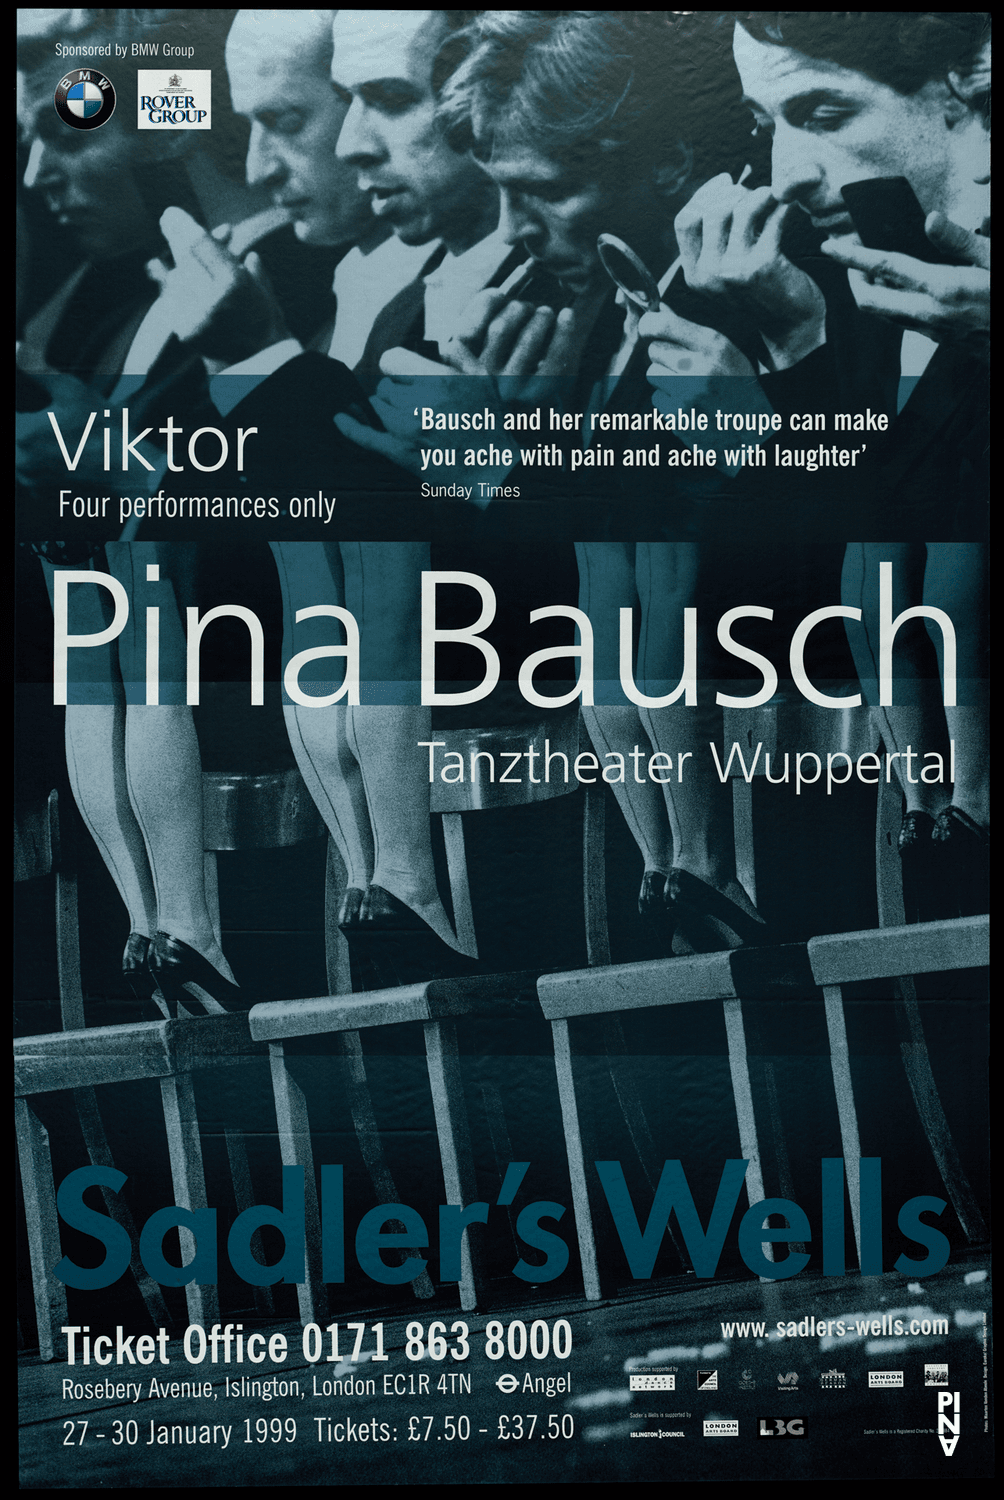 Poster for “Viktor” by Pina Bausch in London, 01/27/1999 – 01/30/1999